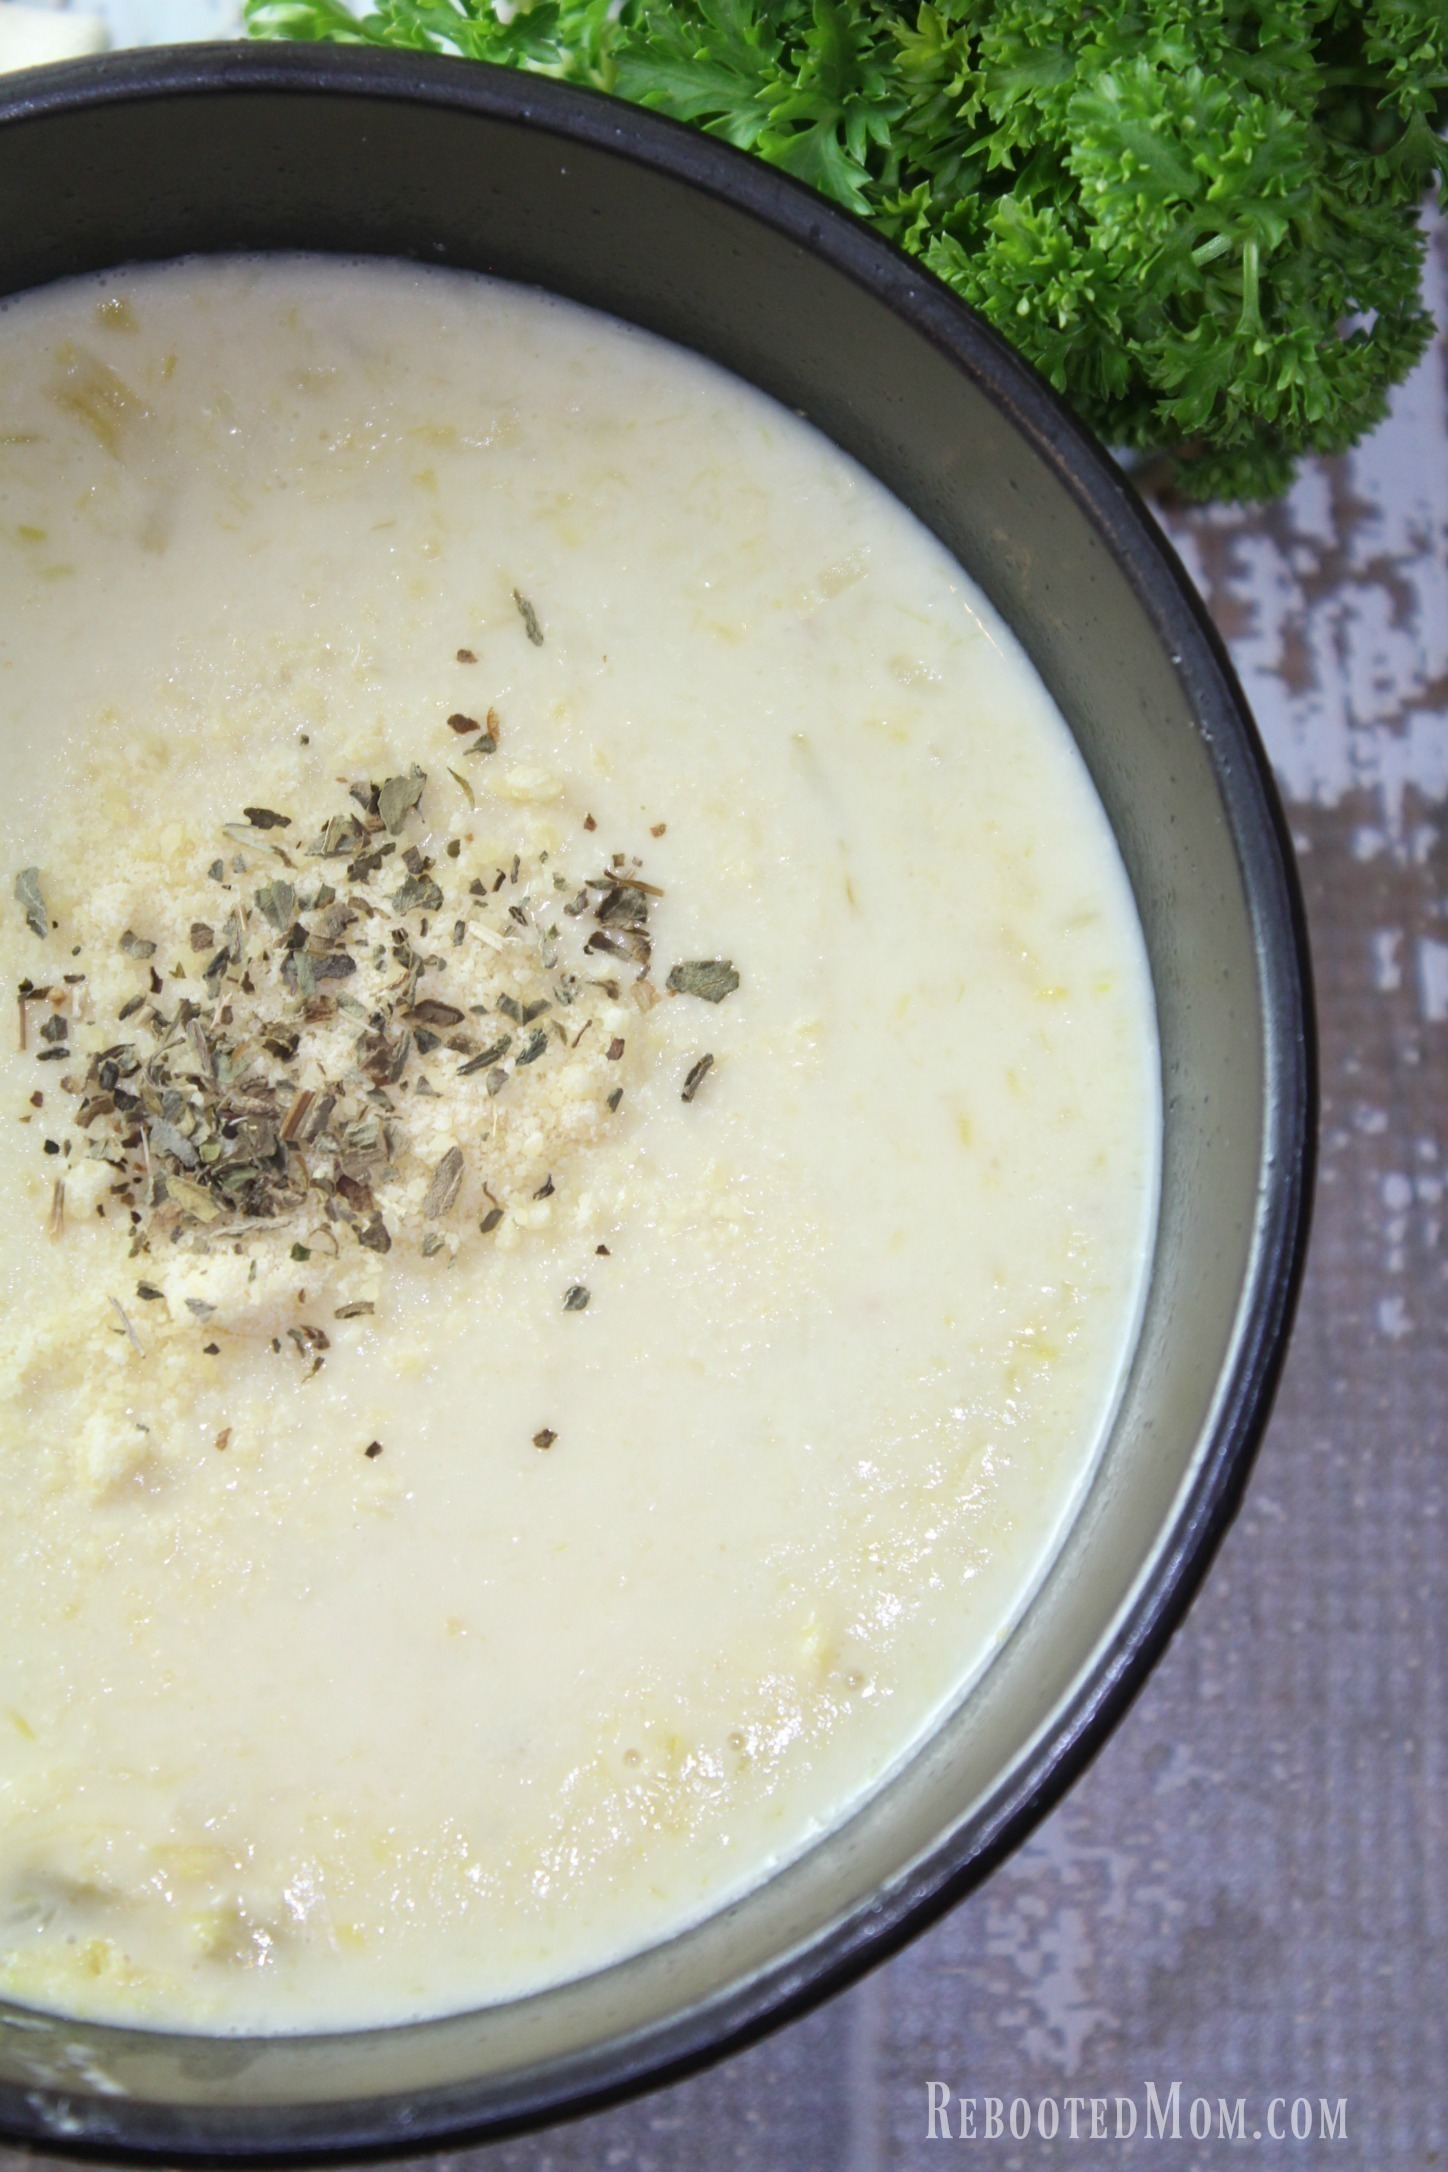 This Leek & Yellow Squash Soup is thick, rich and incredibly easy to make!